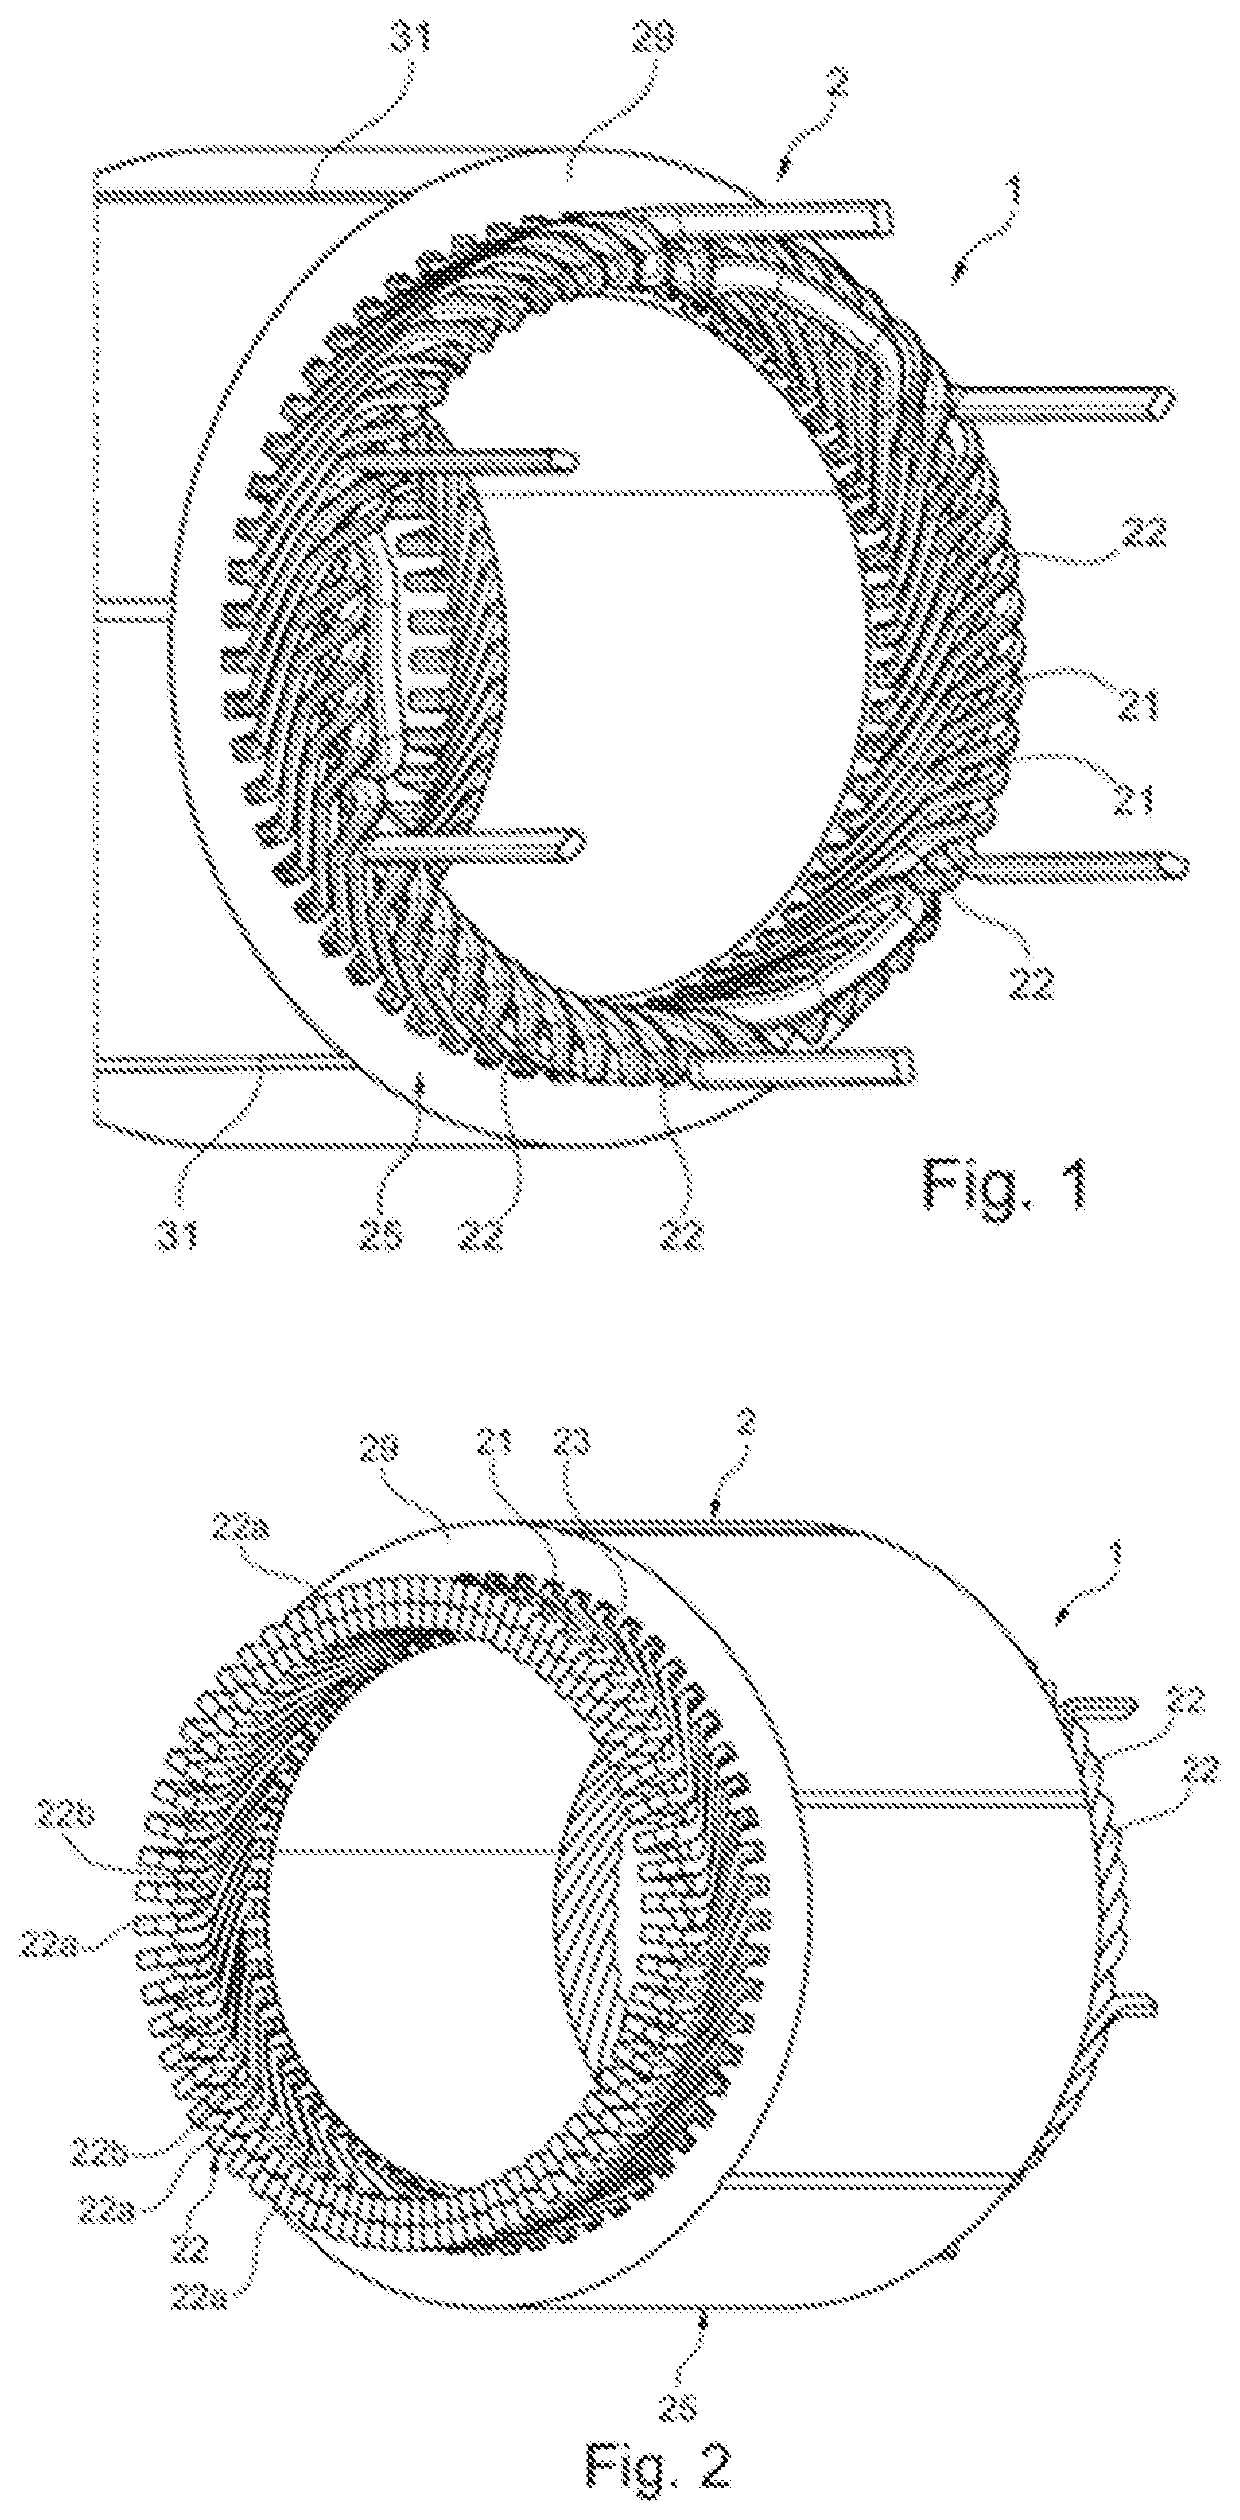 Stator for a rotating electrical machine